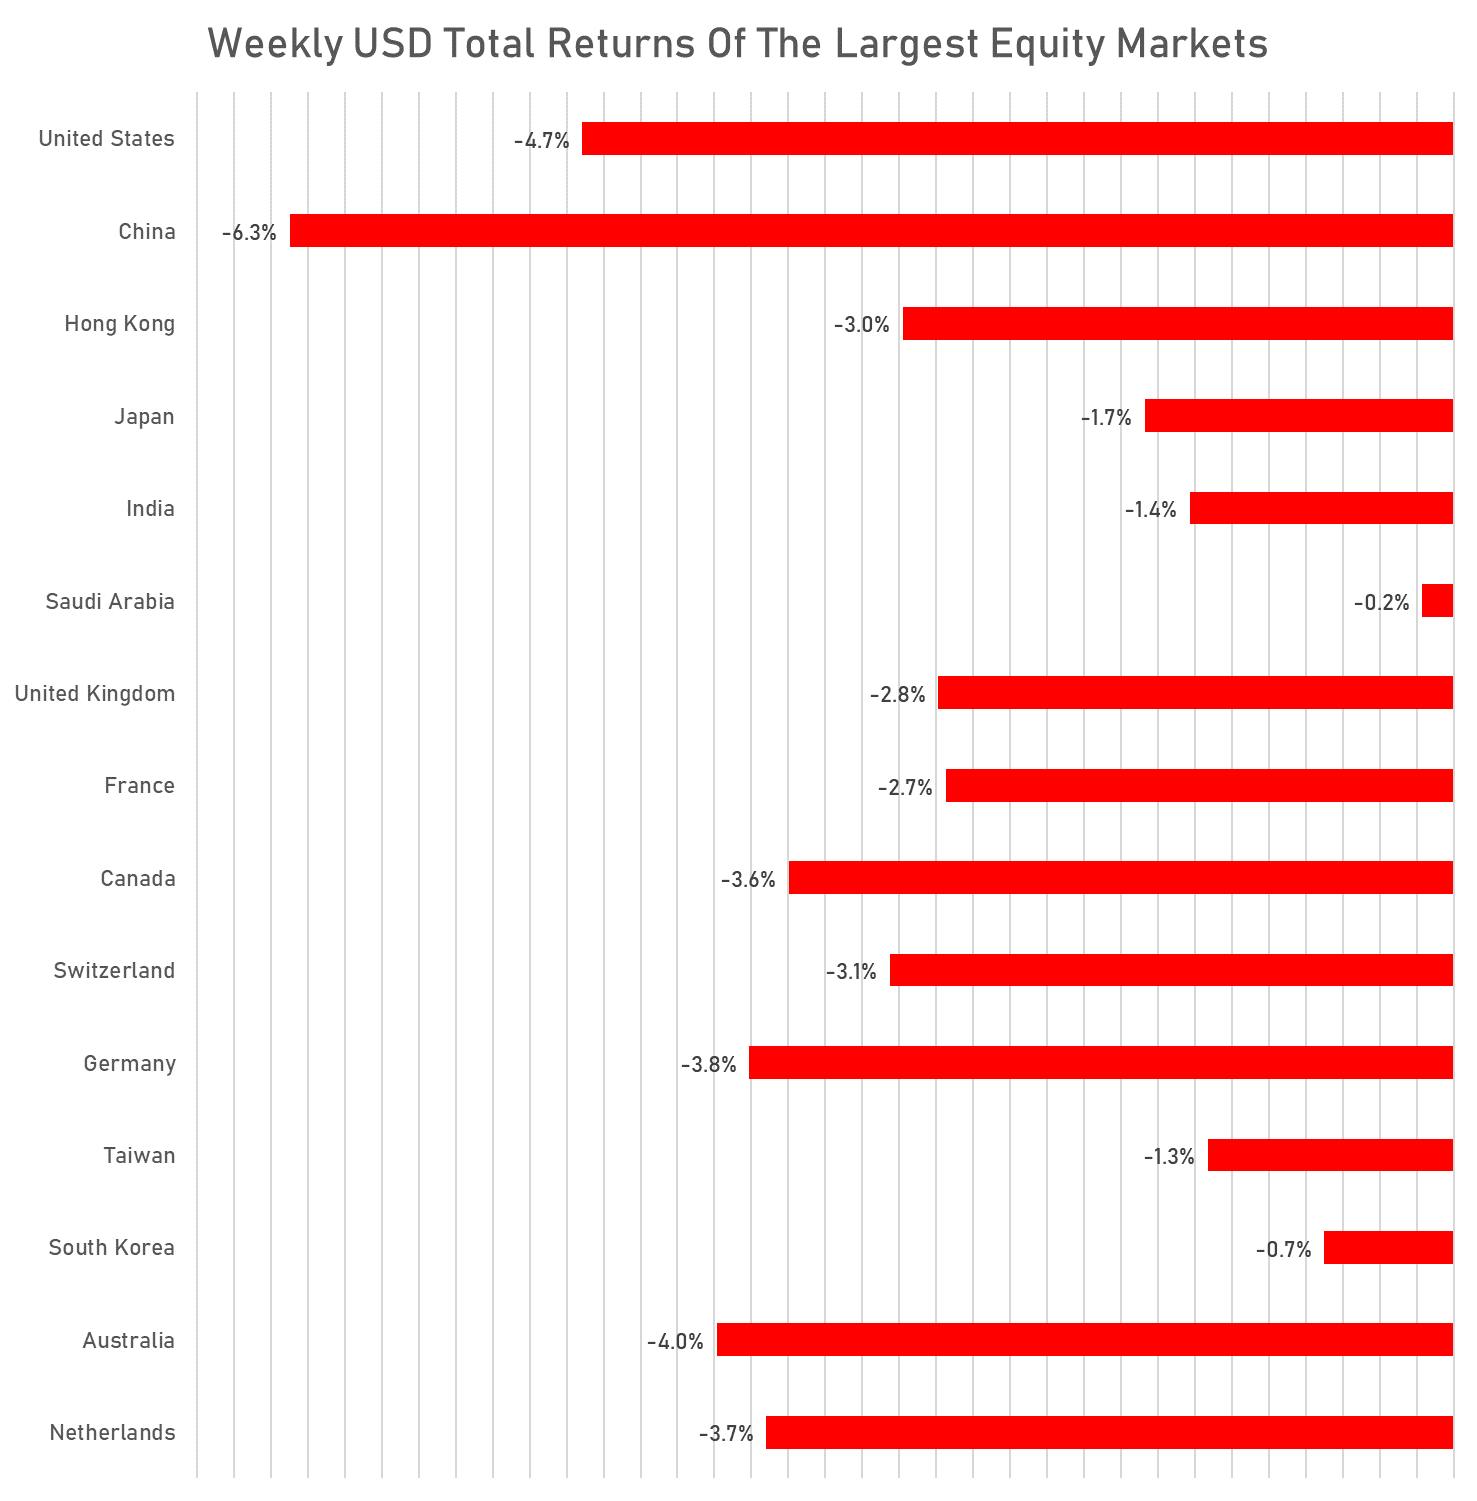 Weekly USD Total Returns Of Global Markets | Sources: phipost.com, FactSet data